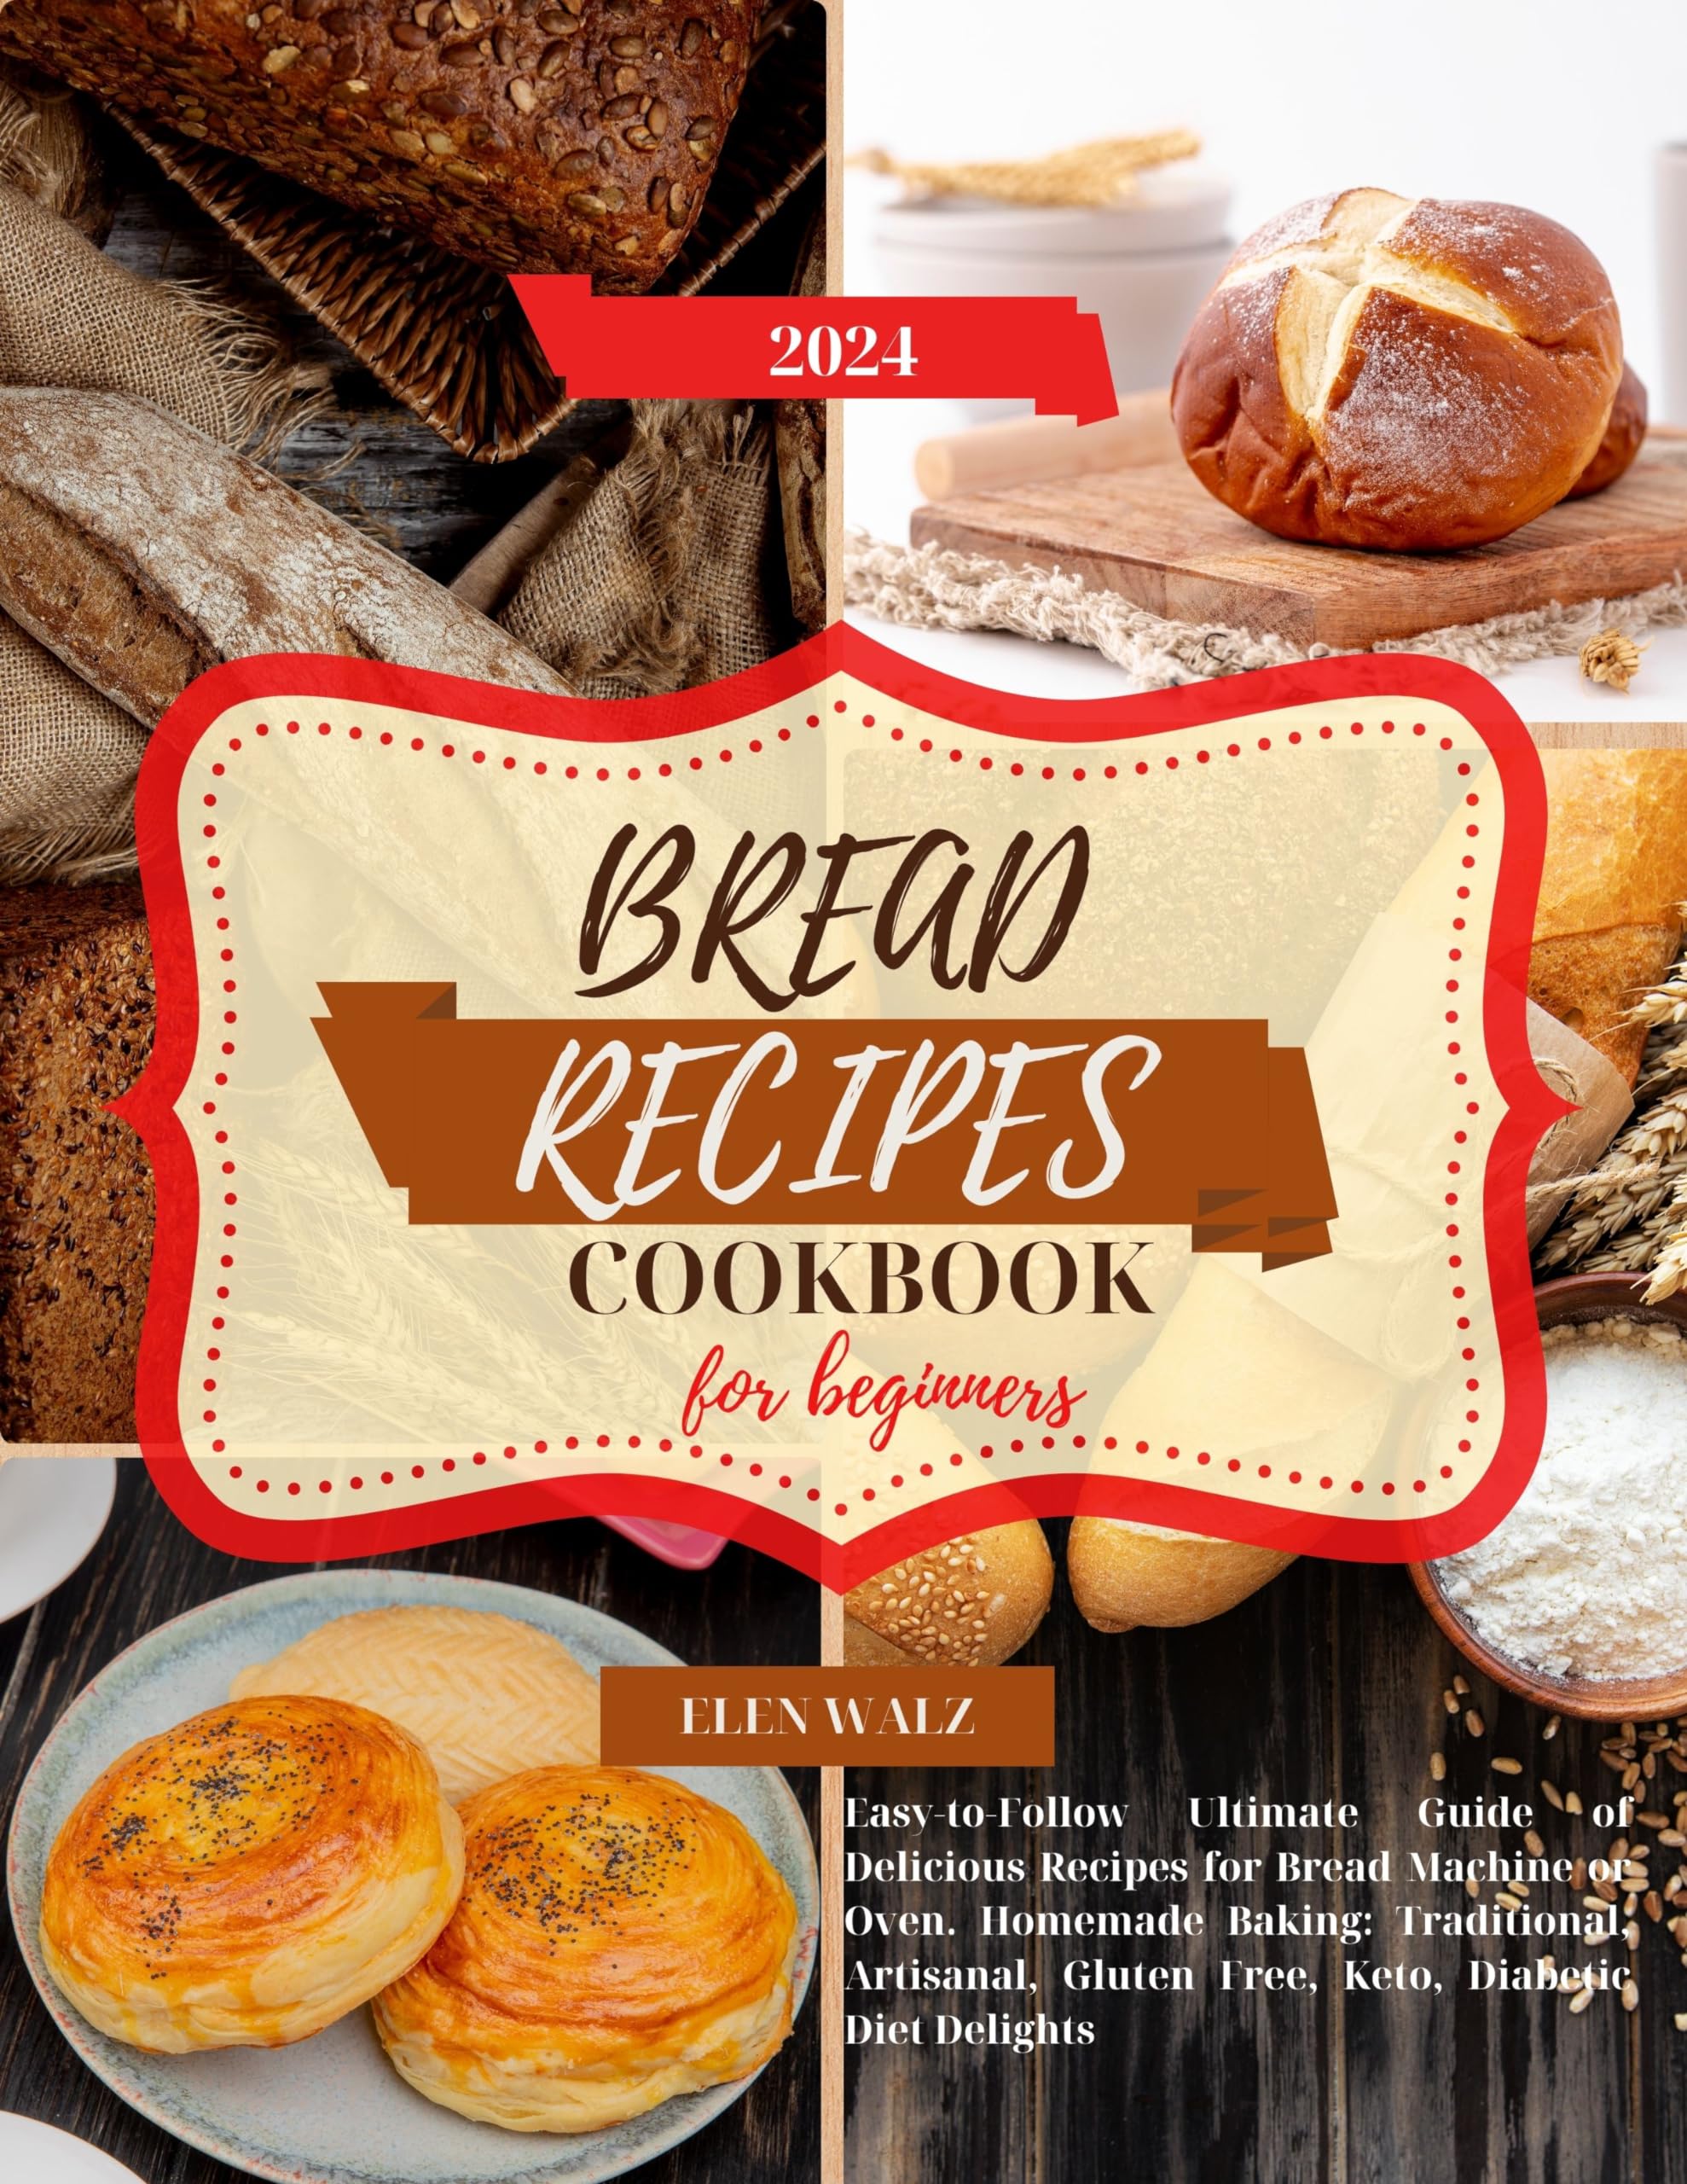 Bread Recipes Cookbook for Beginners: Easy-to-Follow Ultimate Guide of Delicious Recipes for Bread Machine or Oven. Homemade Baking: Traditional, Artisanal, Gluten Free, Keto, Diabetic Diet Delights